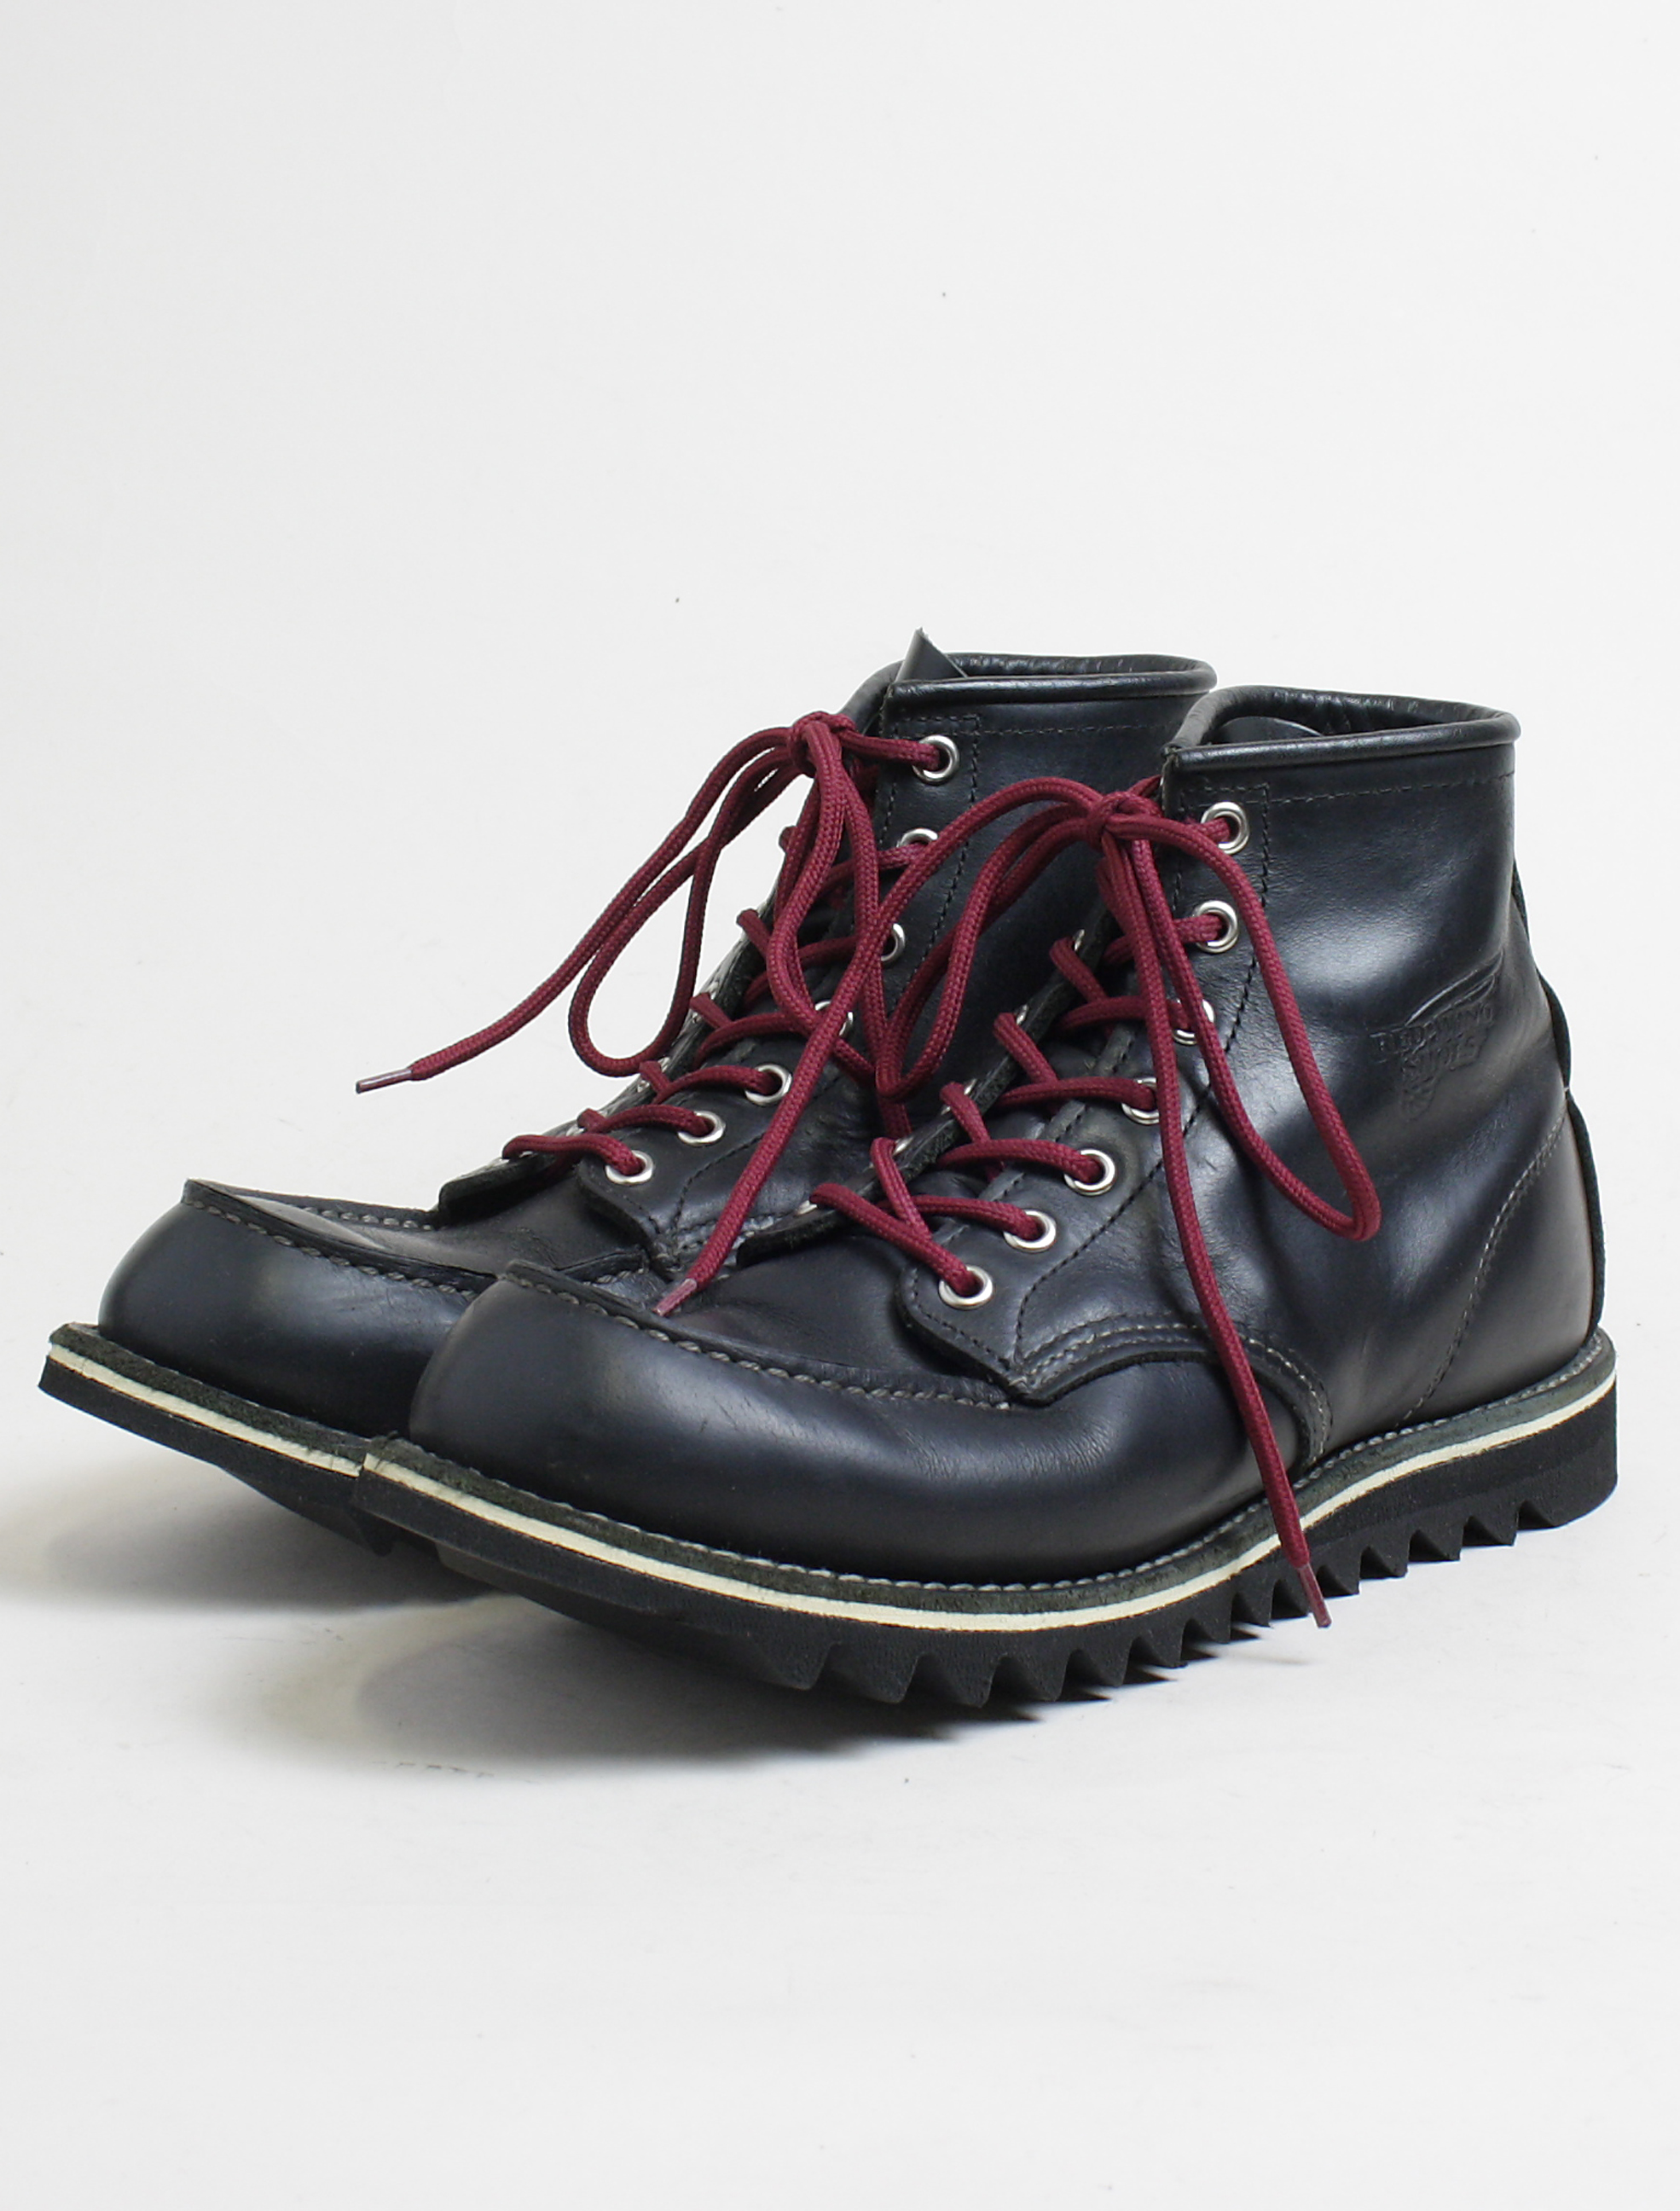 Repair – Redwing resoled with Vibram® Ripple sole pair